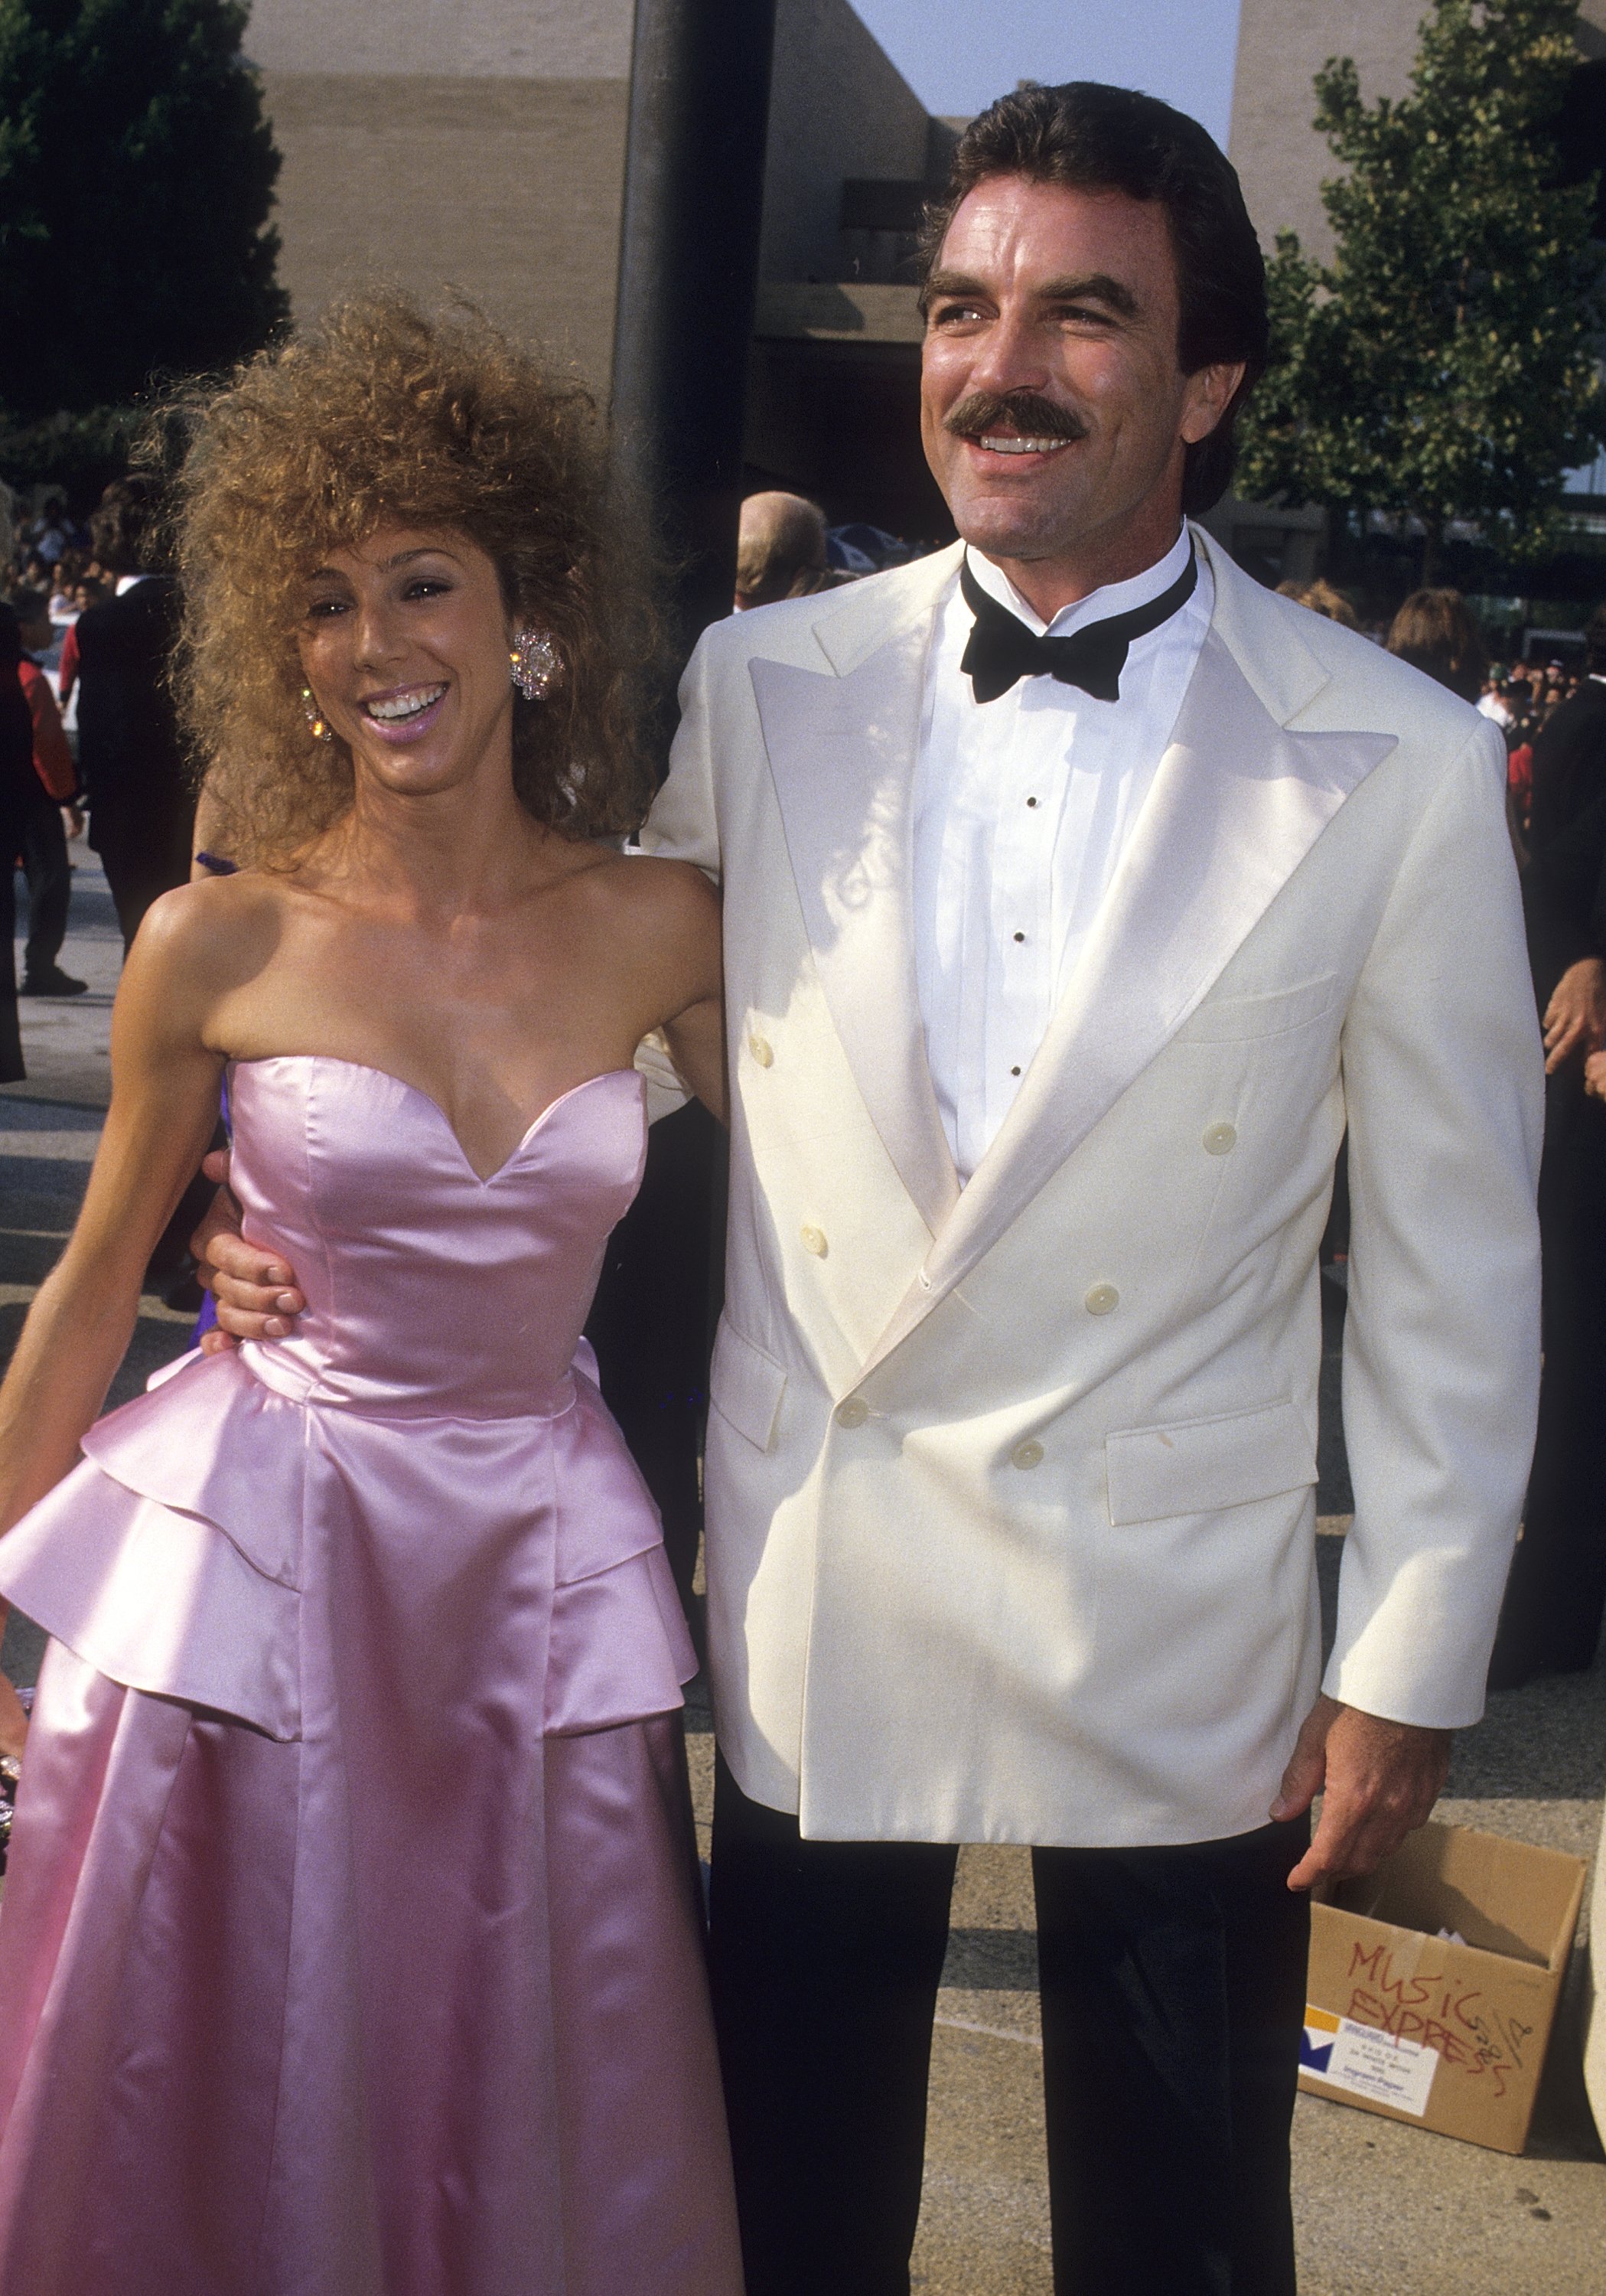 Tom Selleck and Jillie Mack at the 39th Annual Primetime Emmy Awards on September 20, 1987 | Source: Getty Images